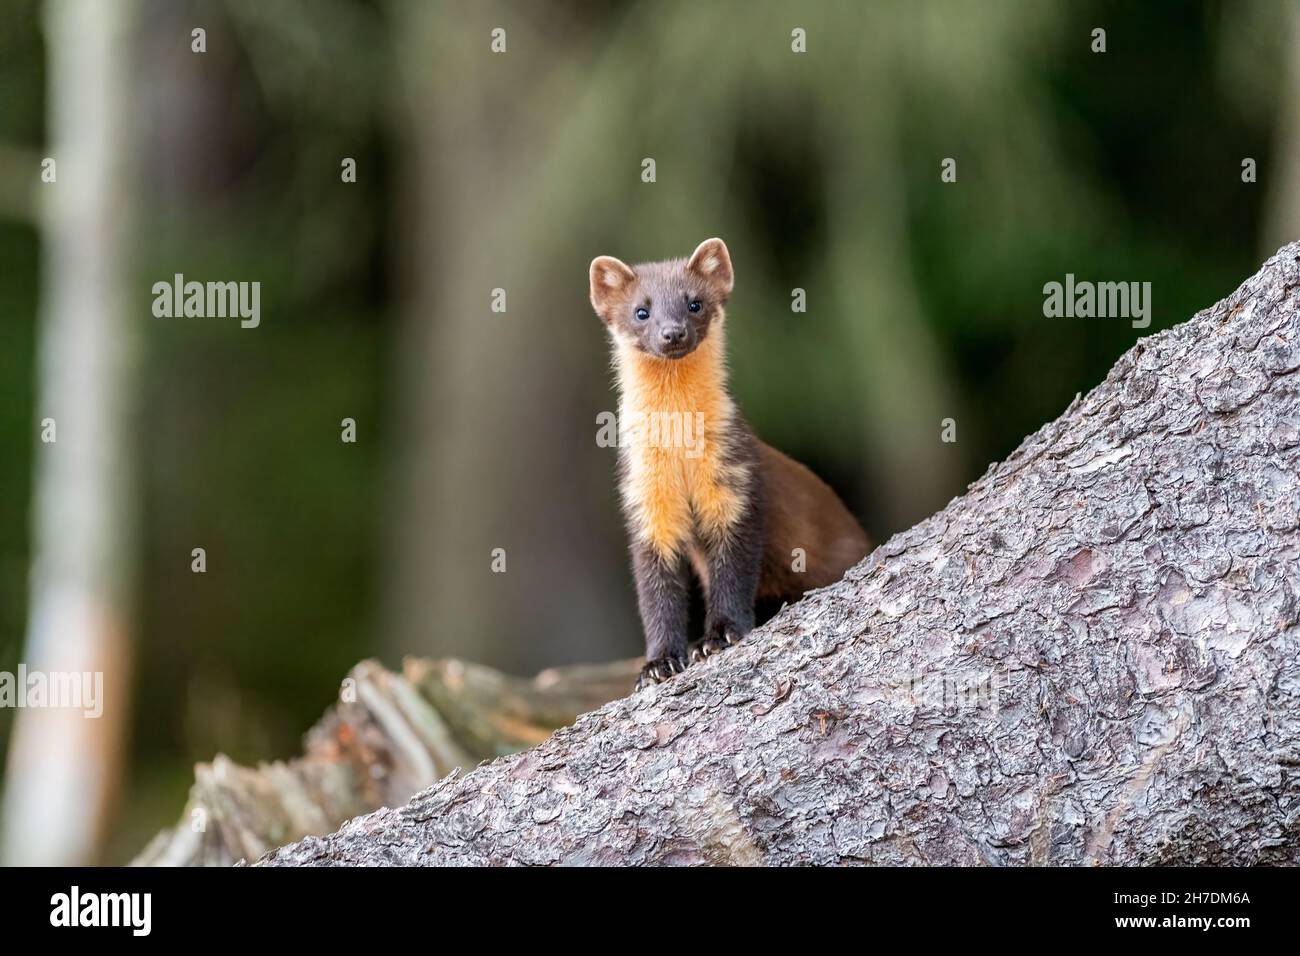 Pine marten (Martes martes) kit in Scottish woodland during daylight in August Stock Photo